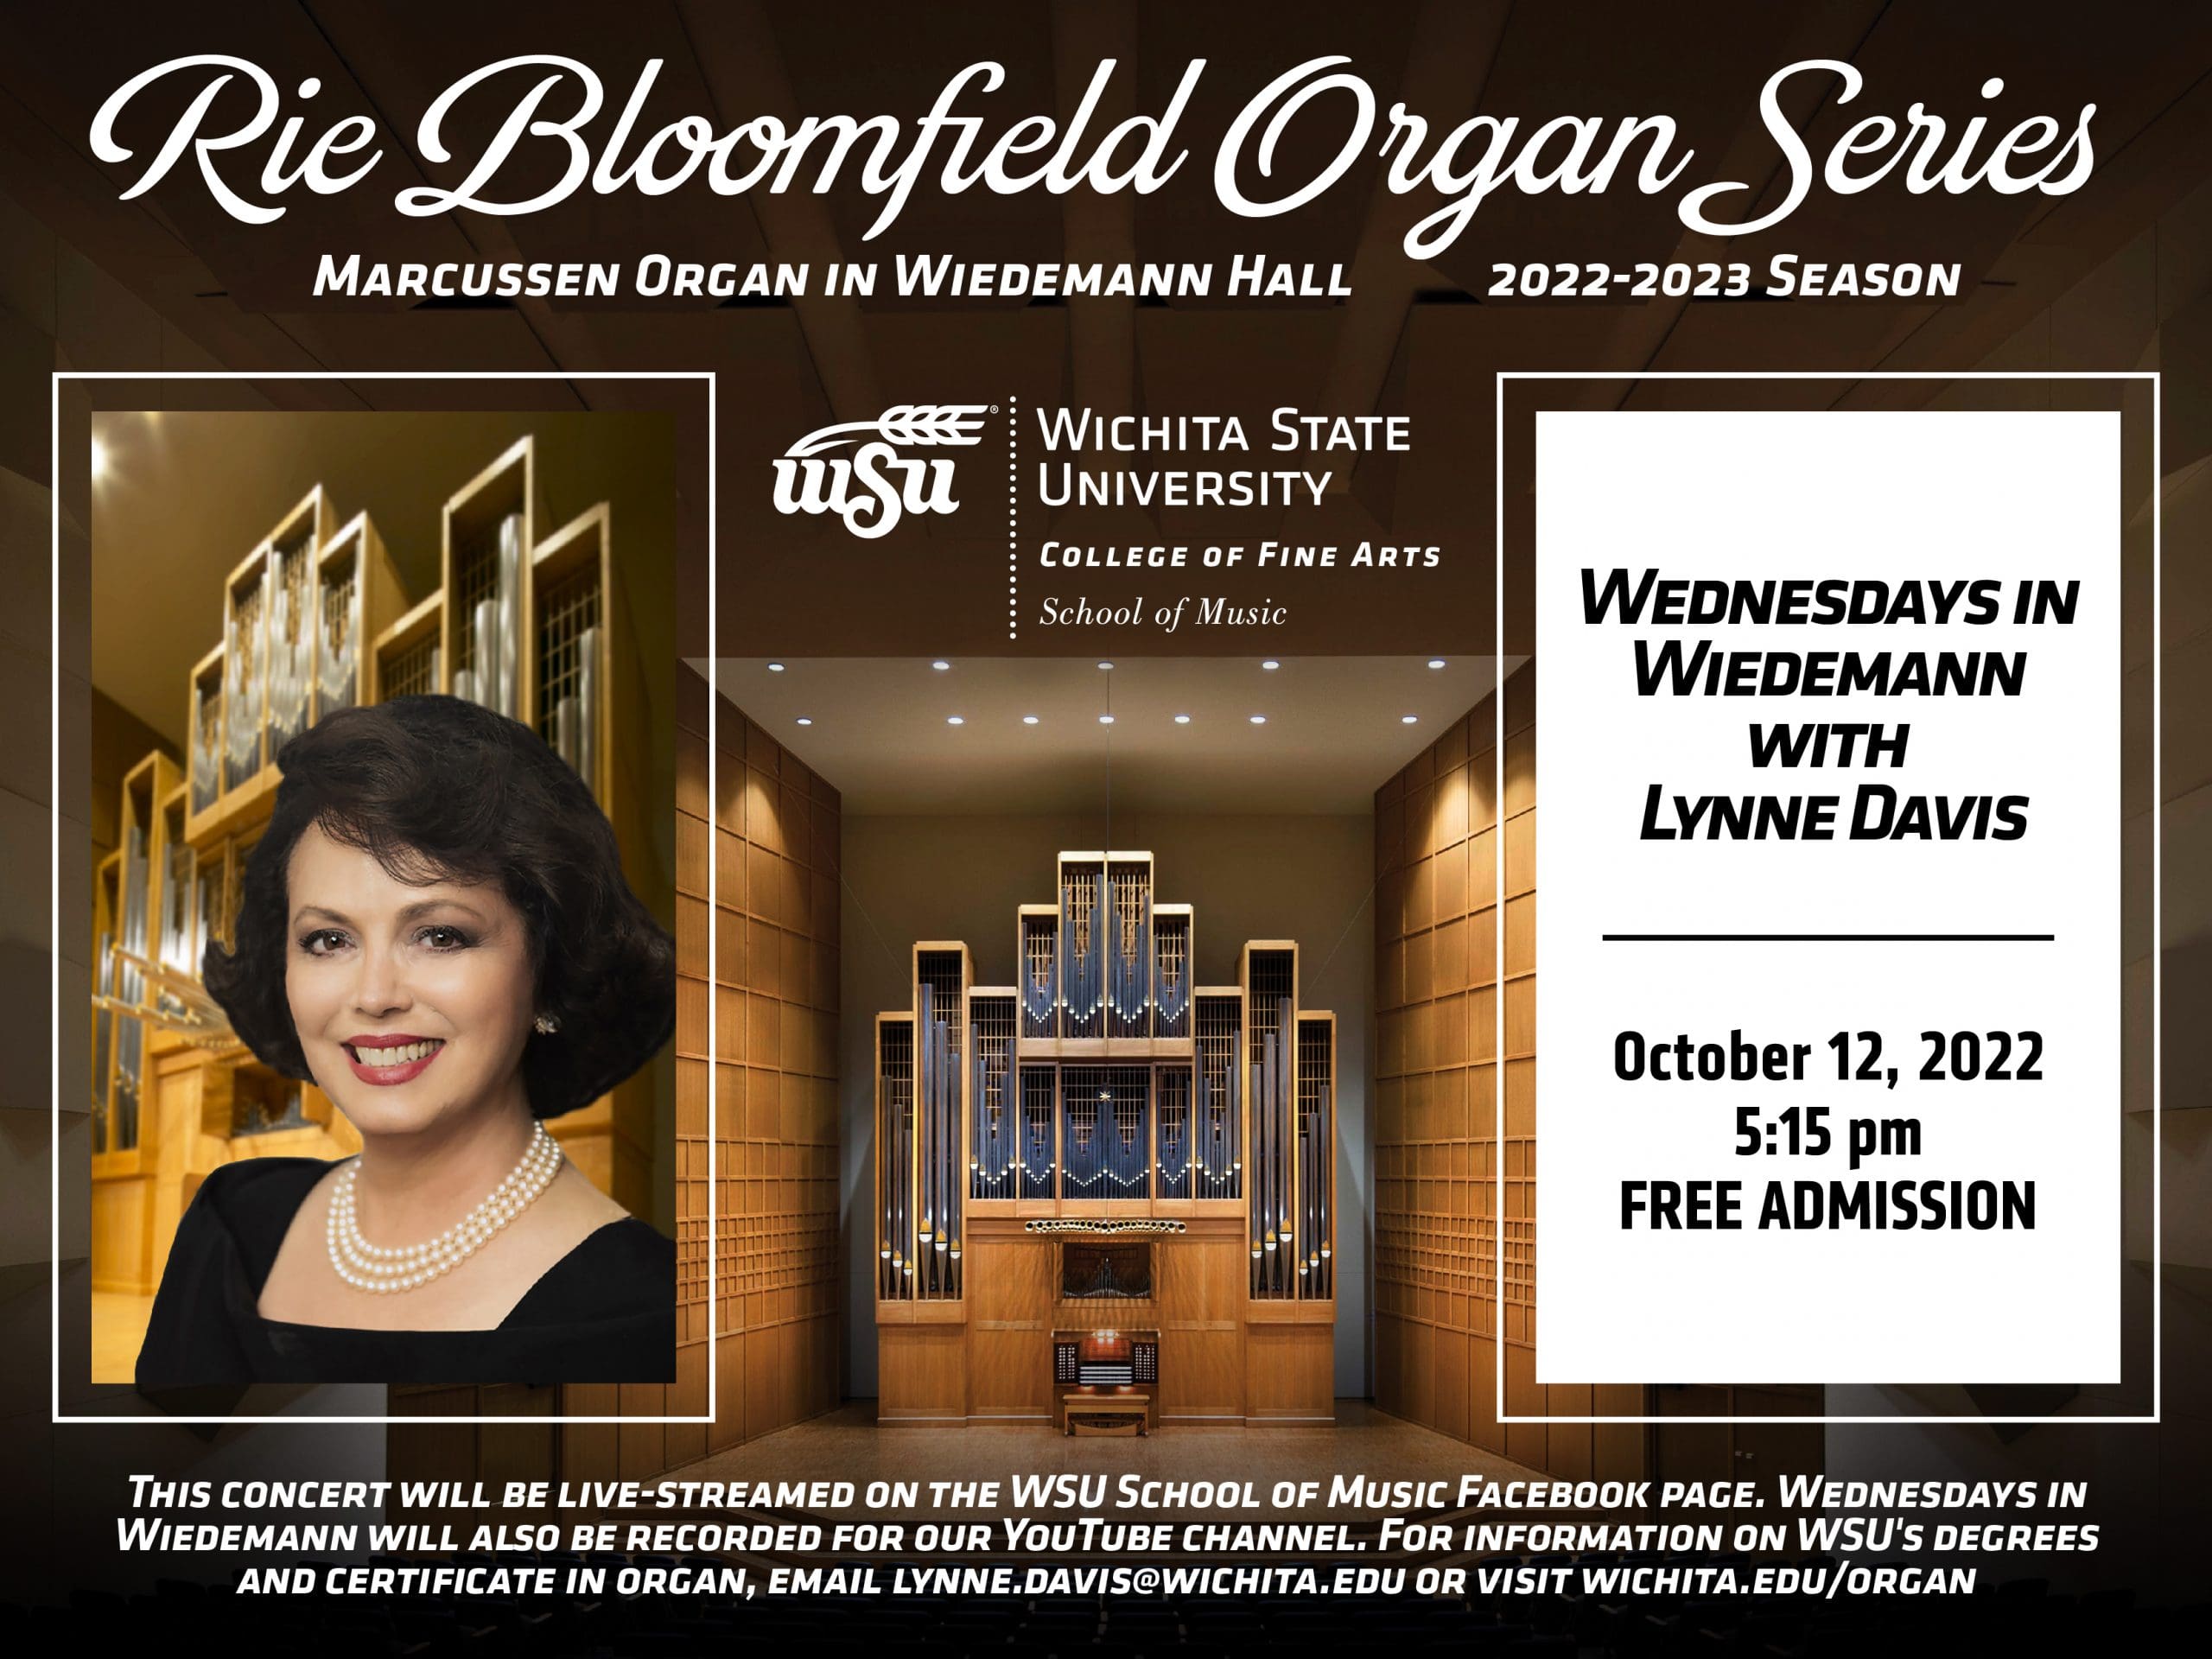 Rie Bloomfield Organ Series 22-23 season. Marcussen organ in Wiedemann Hall. Distinguished guest artists Clive Driskill-Smith, November 8, Organ and Orchestra and November 28, Alcee Chriss on April 18. Wednesdays in Wiedemann with Lynne Davis on October 12, Feb. 1 March 8 May 3. Free Admission.